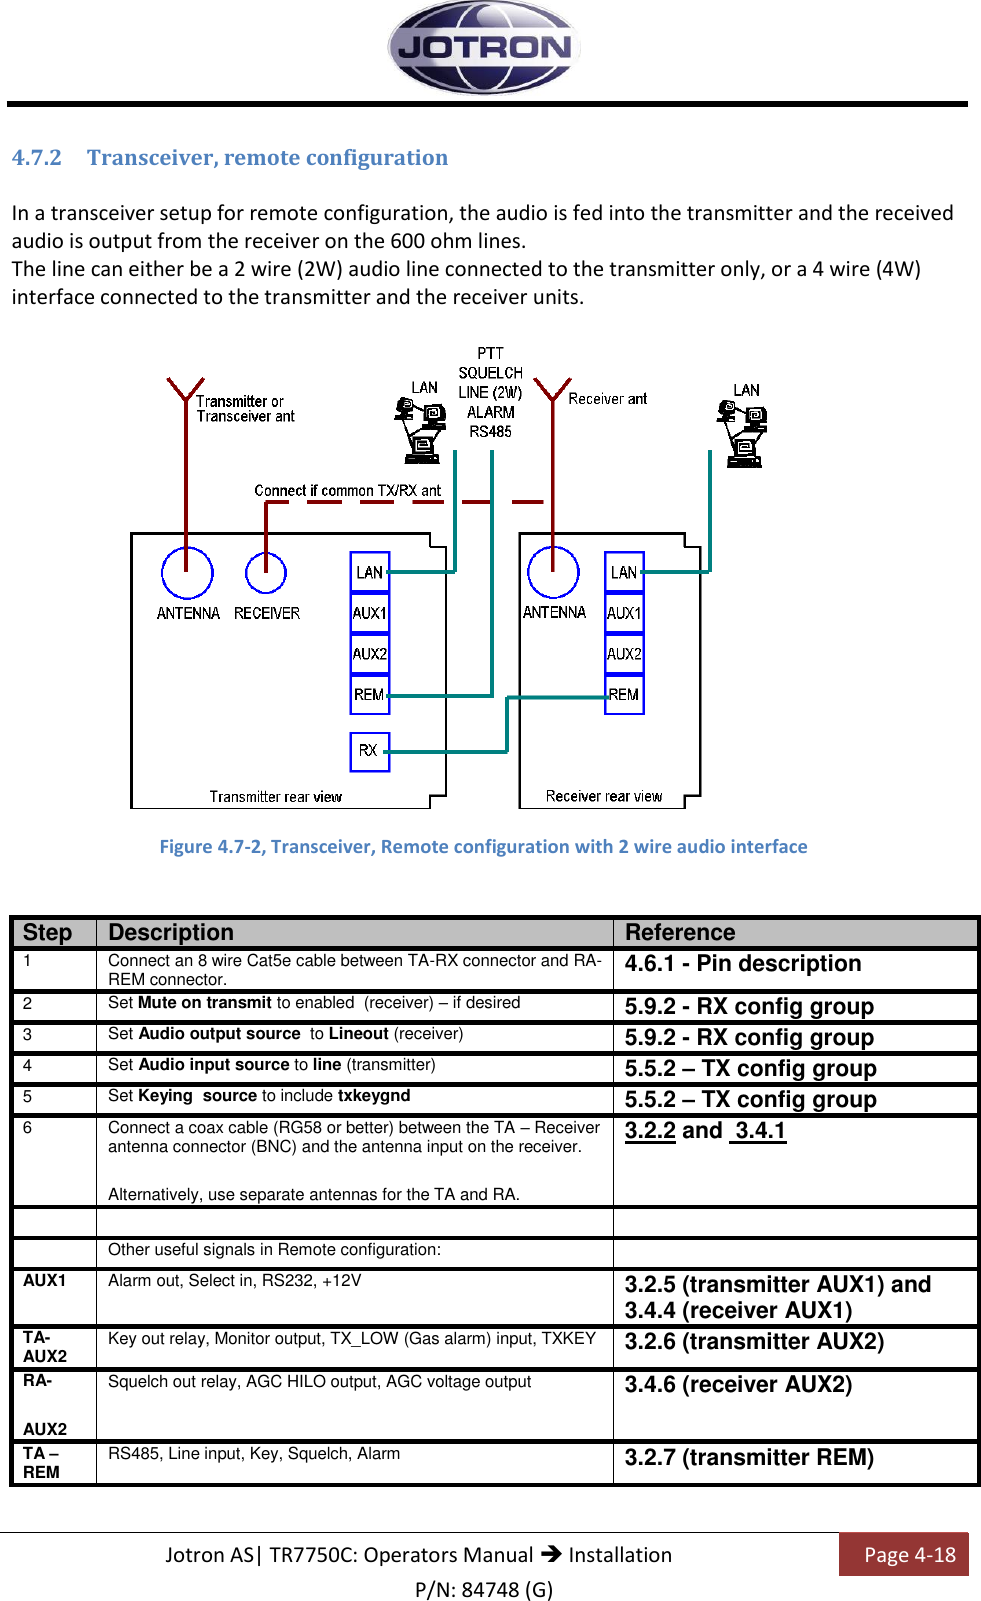   Jotron AS| TR7750C: Operators Manual  Installation Page 4-18 P/N: 84748 (G) 4.7.2 Transceiver, remote configuration  In a transceiver setup for remote configuration, the audio is fed into the transmitter and the received audio is output from the receiver on the 600 ohm lines. The line can either be a 2 wire (2W) audio line connected to the transmitter only, or a 4 wire (4W) interface connected to the transmitter and the receiver units.    Figure 4.7-2, Transceiver, Remote configuration with 2 wire audio interface   Step Description Reference 1 Connect an 8 wire Cat5e cable between TA-RX connector and RA-REM connector. 4.6.1 - Pin description 2 Set Mute on transmit to enabled  (receiver) – if desired 5.9.2 - RX config group 3 Set Audio output source  to Lineout (receiver) 5.9.2 - RX config group 4 Set Audio input source to line (transmitter)  5.5.2 – TX config group 5 Set Keying  source to include txkeygnd 5.5.2 – TX config group 6 Connect a coax cable (RG58 or better) between the TA – Receiver antenna connector (BNC) and the antenna input on the receiver. Alternatively, use separate antennas for the TA and RA. 3.2.2 and  3.4.1     Other useful signals in Remote configuration:  AUX1 Alarm out, Select in, RS232, +12V 3.2.5 (transmitter AUX1) and 3.4.4 (receiver AUX1) TA-AUX2 Key out relay, Monitor output, TX_LOW (Gas alarm) input, TXKEY 3.2.6 (transmitter AUX2) RA- AUX2 Squelch out relay, AGC HILO output, AGC voltage output 3.4.6 (receiver AUX2) TA – REM RS485, Line input, Key, Squelch, Alarm 3.2.7 (transmitter REM)  